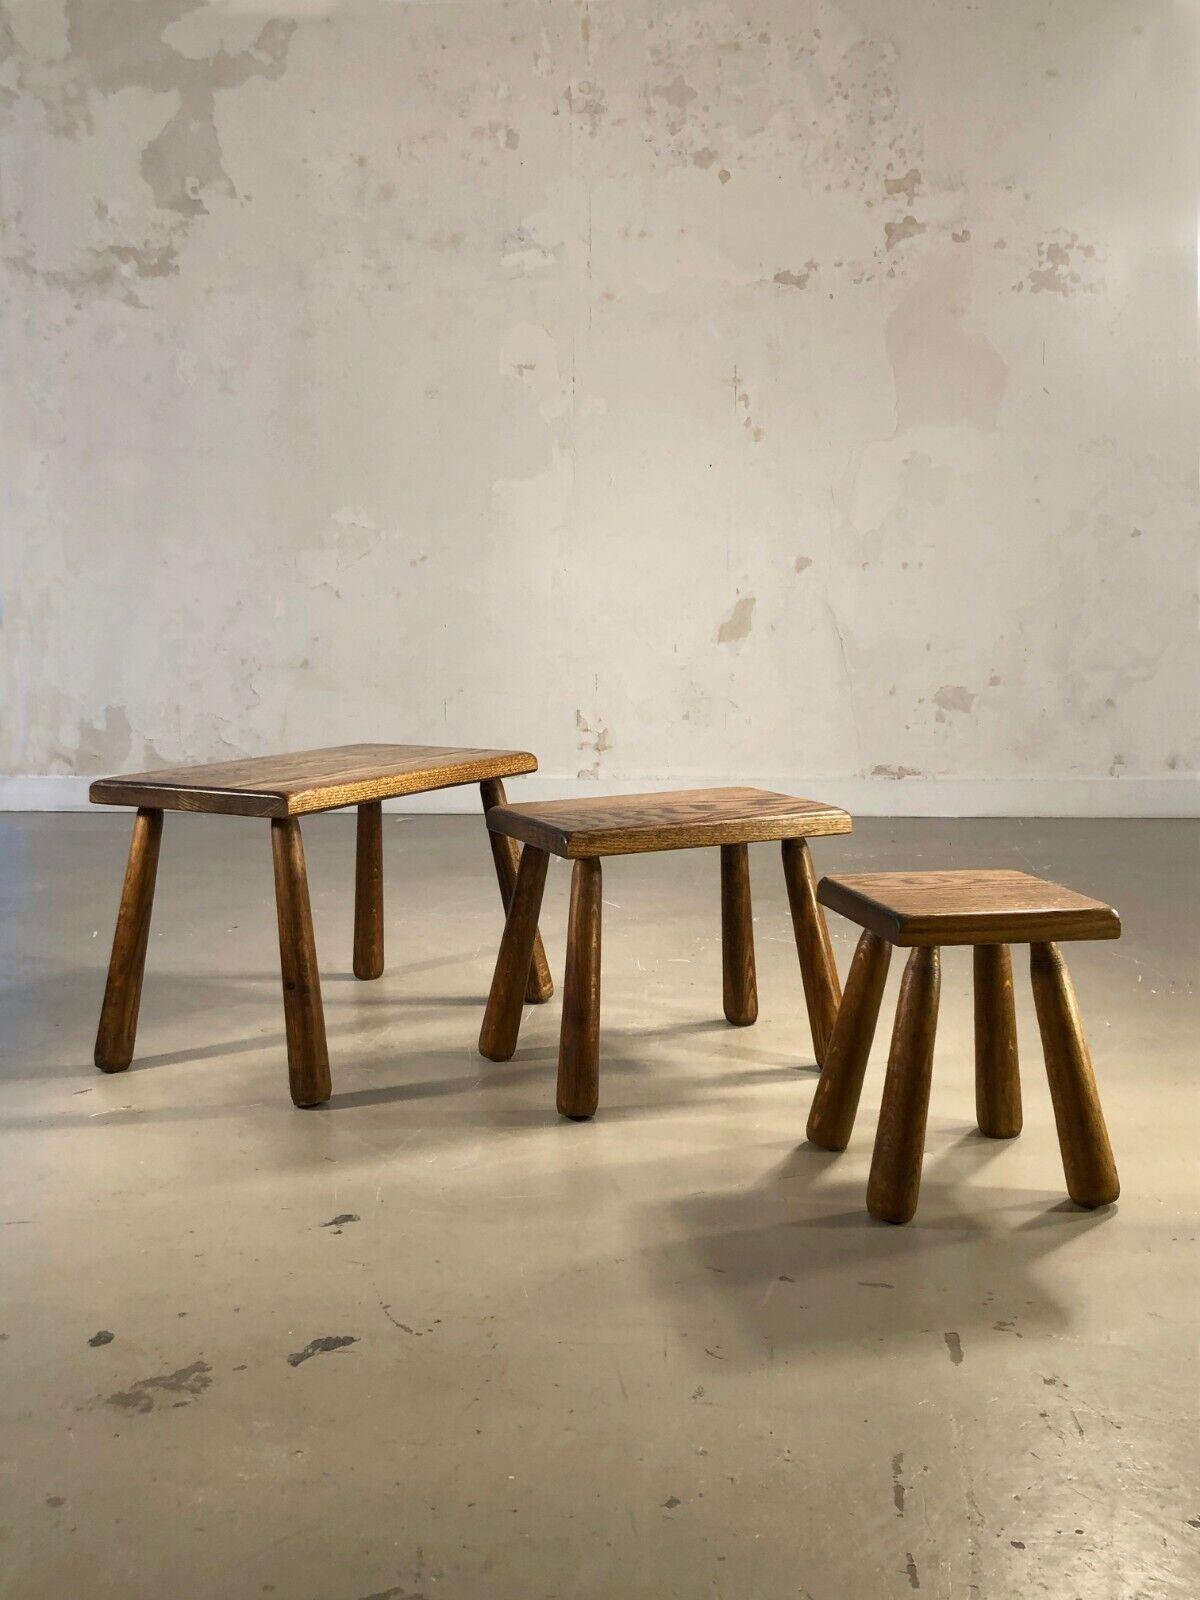 A set of 3 nesting tables, or side tables, bedside tables or end tables, Modernist, Brutalist, Popular Art, Free Form, in varnished solid wood, with club legs, To be attributed, France 1950-1960.